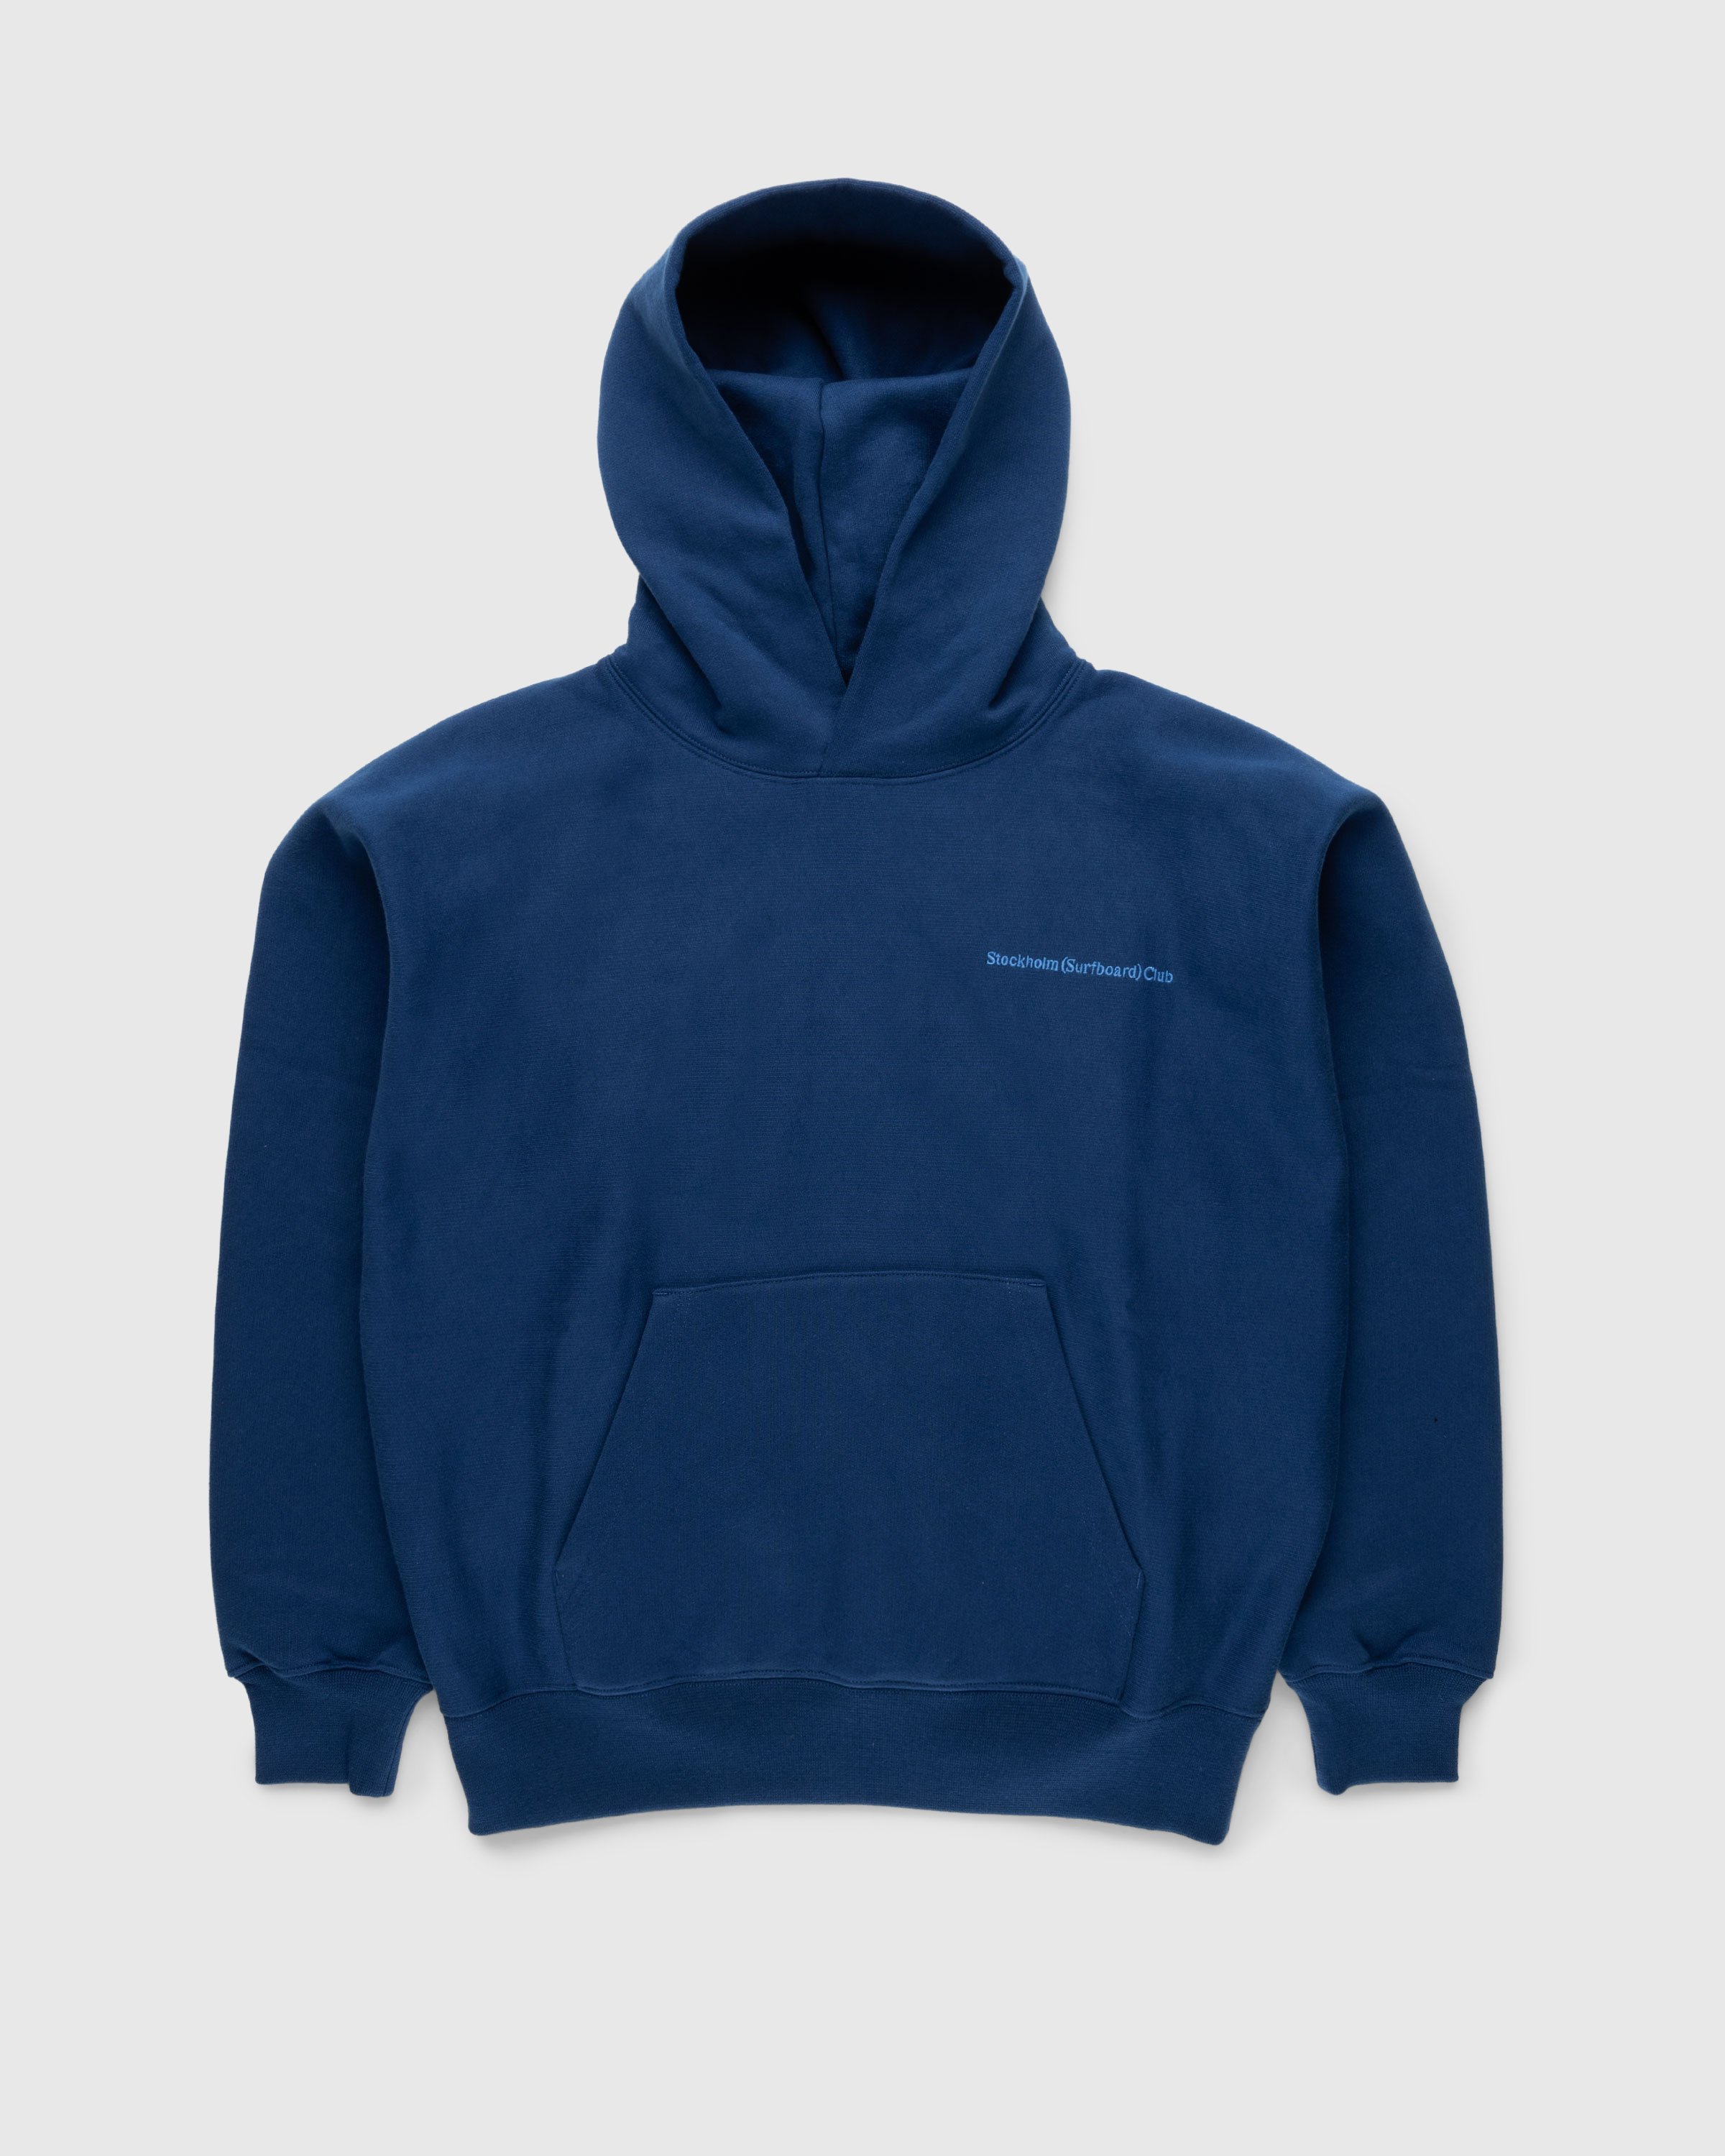 Stockholm Surfboard Club - Jes Hoodie Midnight Blue - Clothing - Blue - Image 1